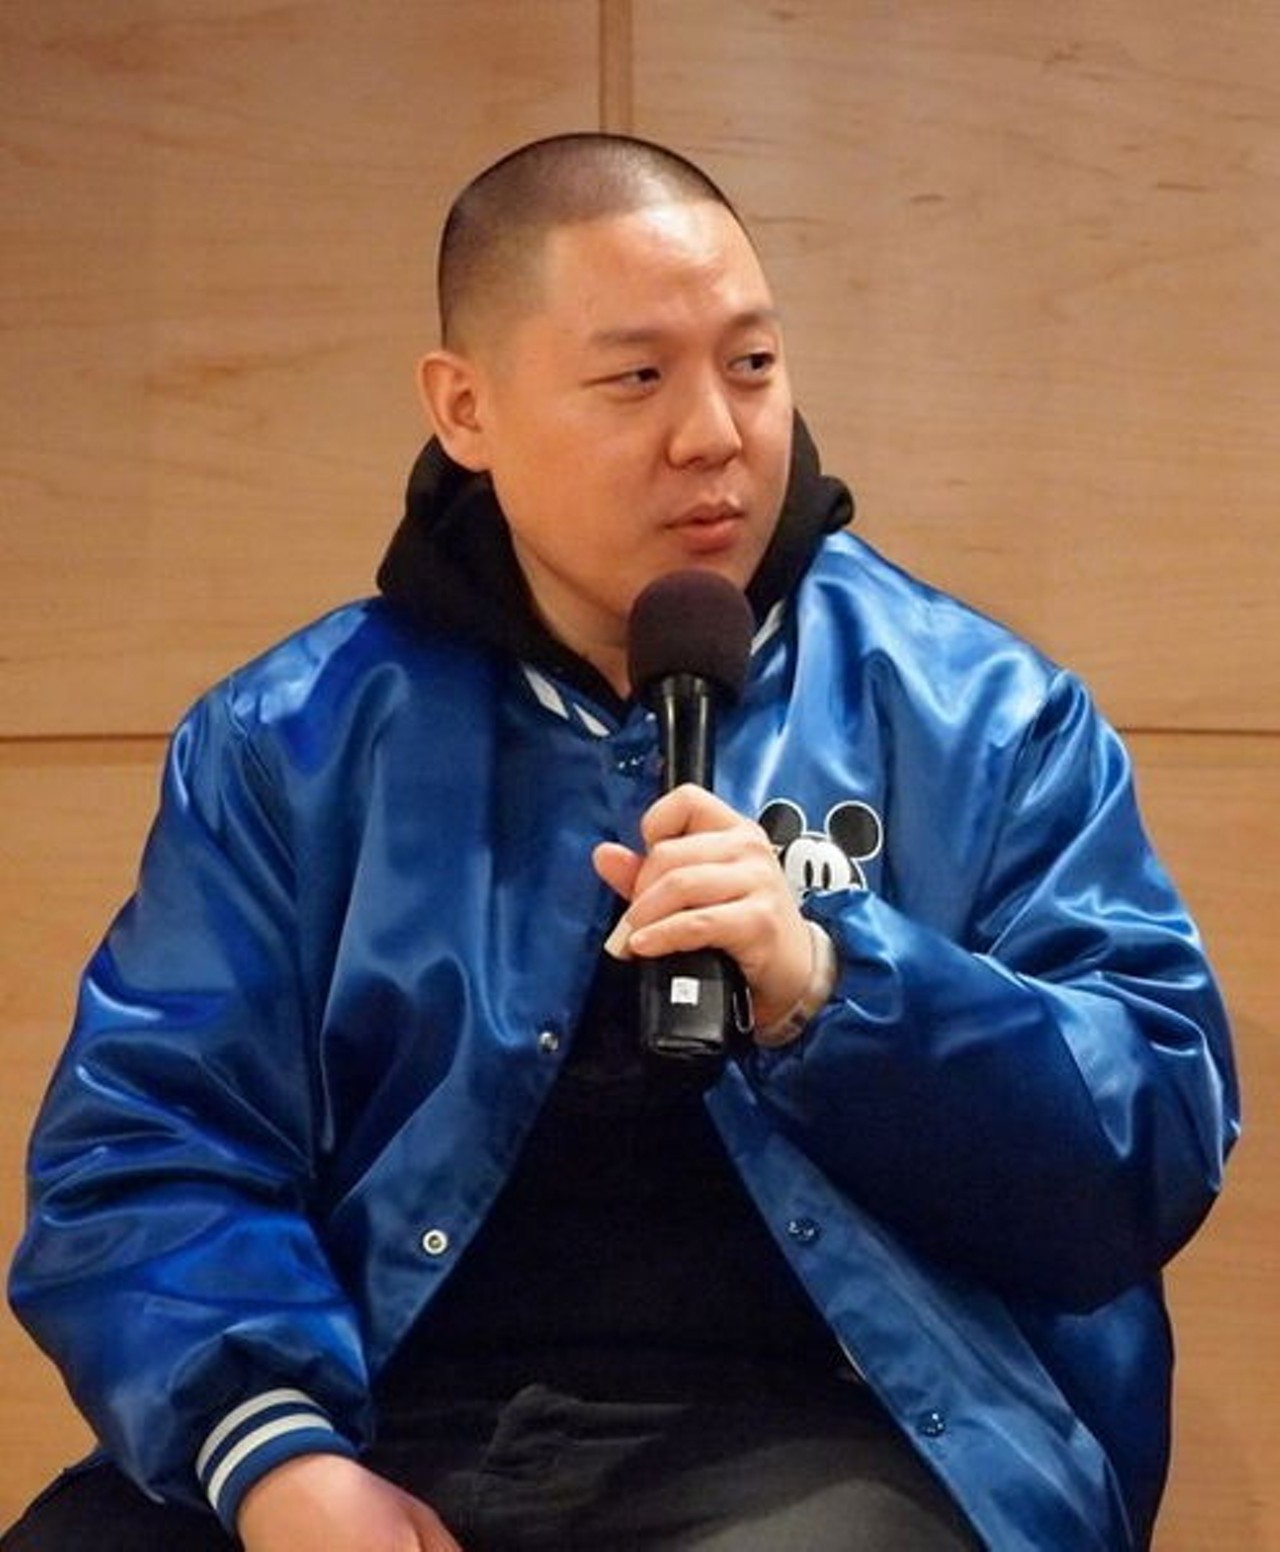 Eddie Huang- A food show personality. Eddie hosted Cheap Eats on the Food Network and Fresh Off the Boat on Vice.